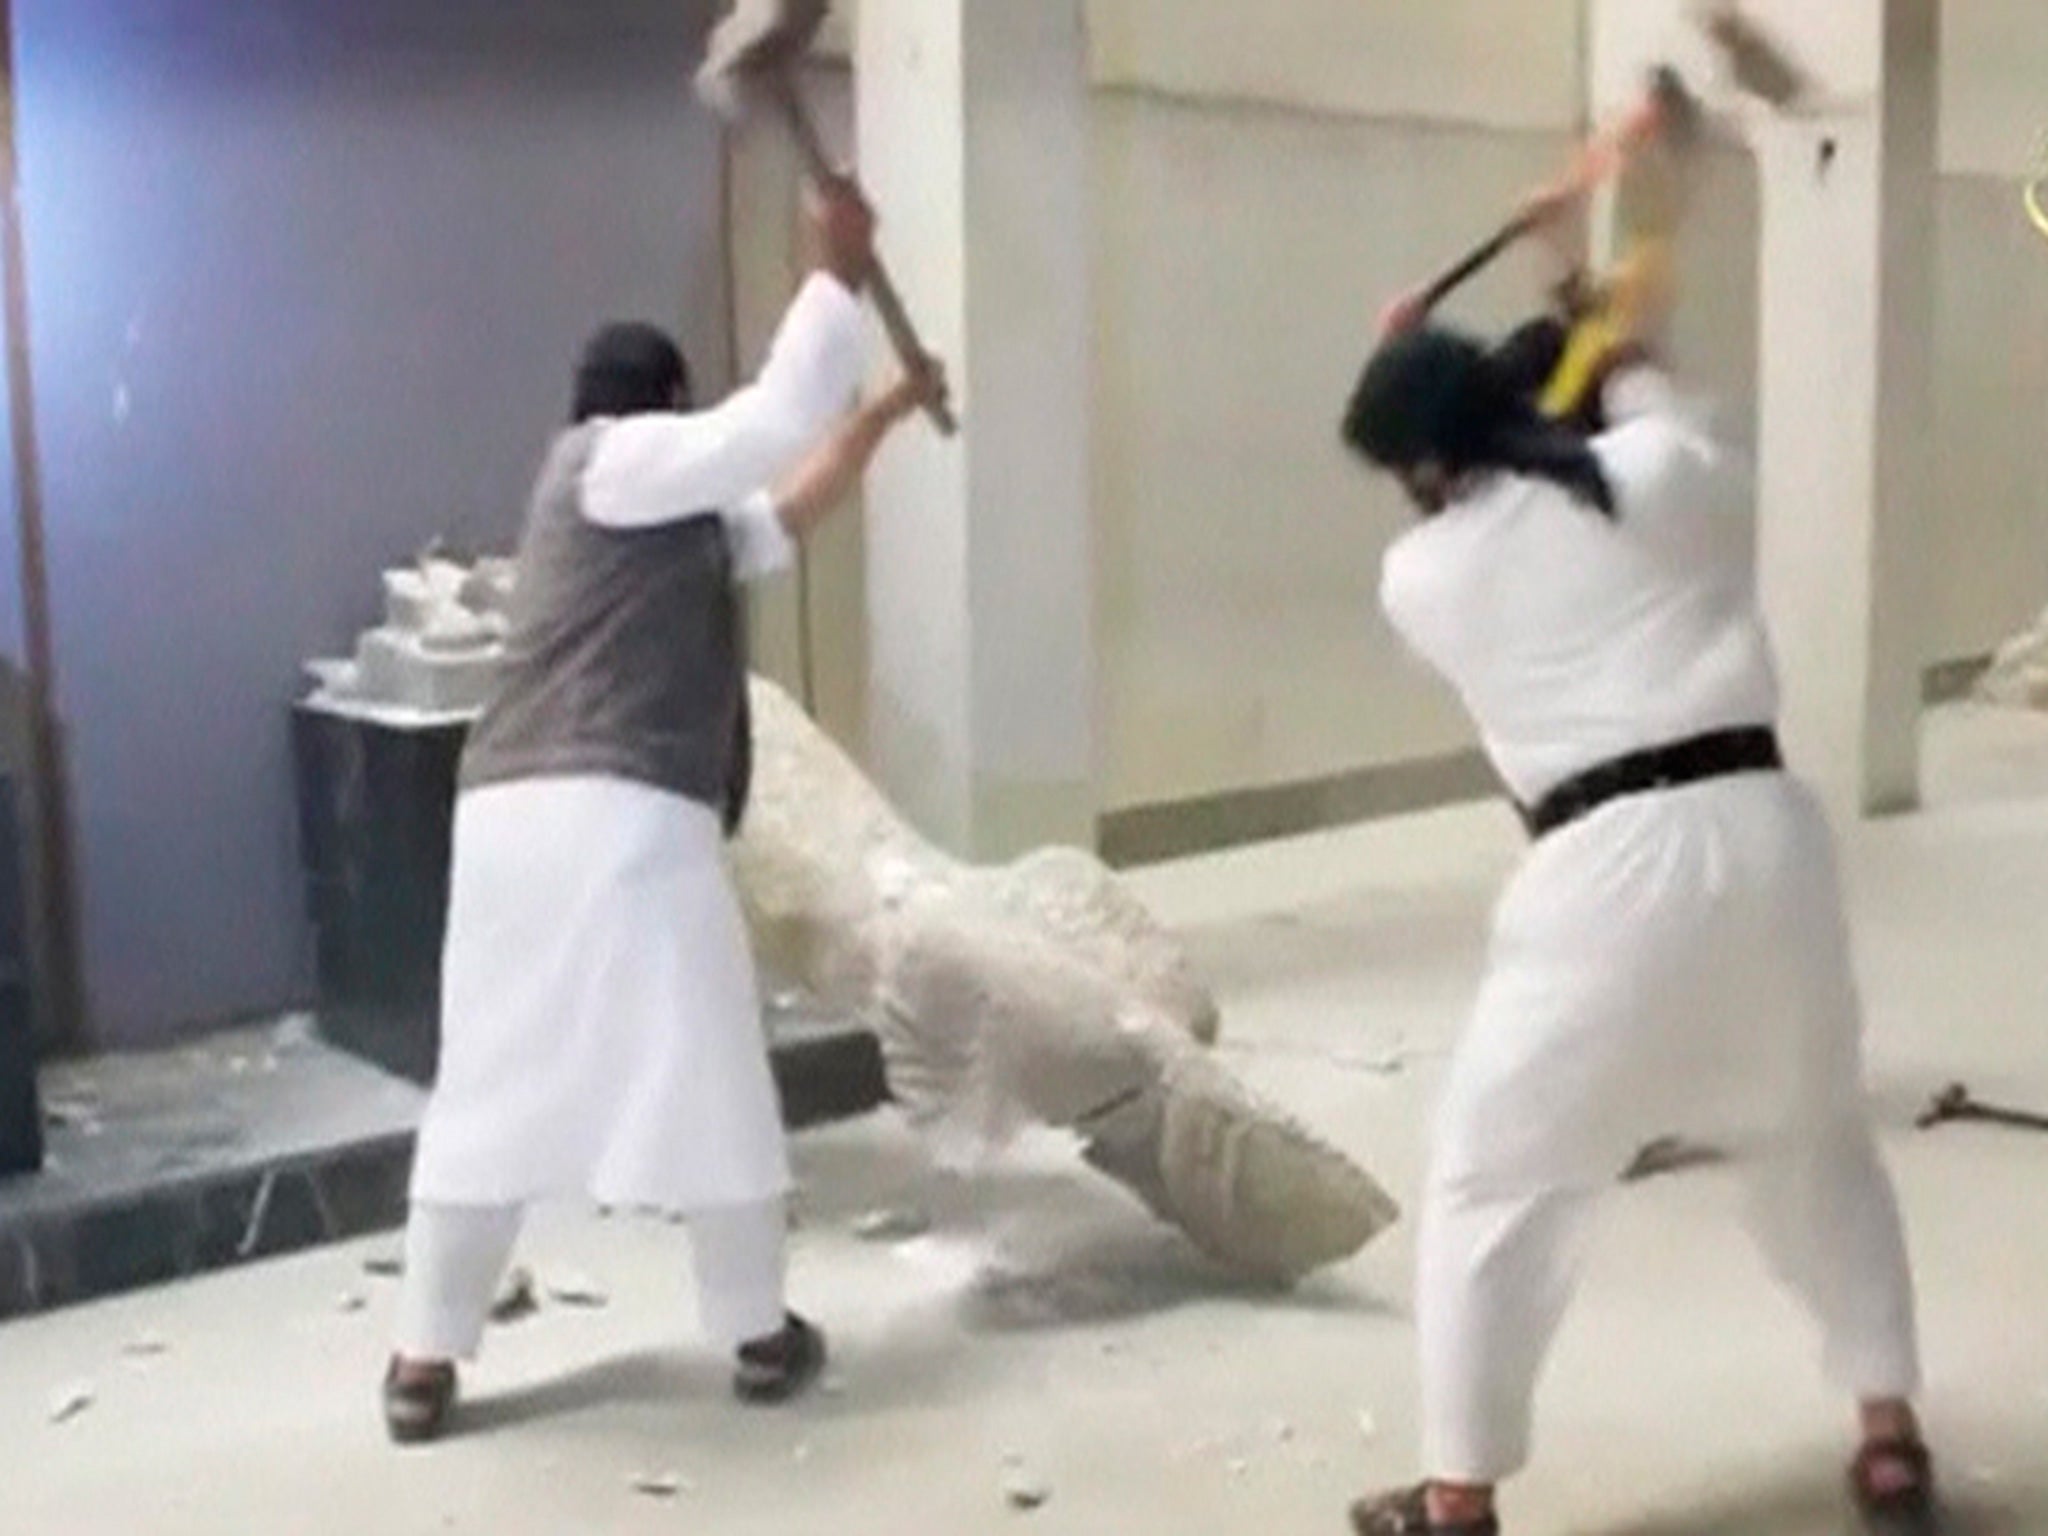 last week, Isis released a video showing the destruction of statues in Mosul